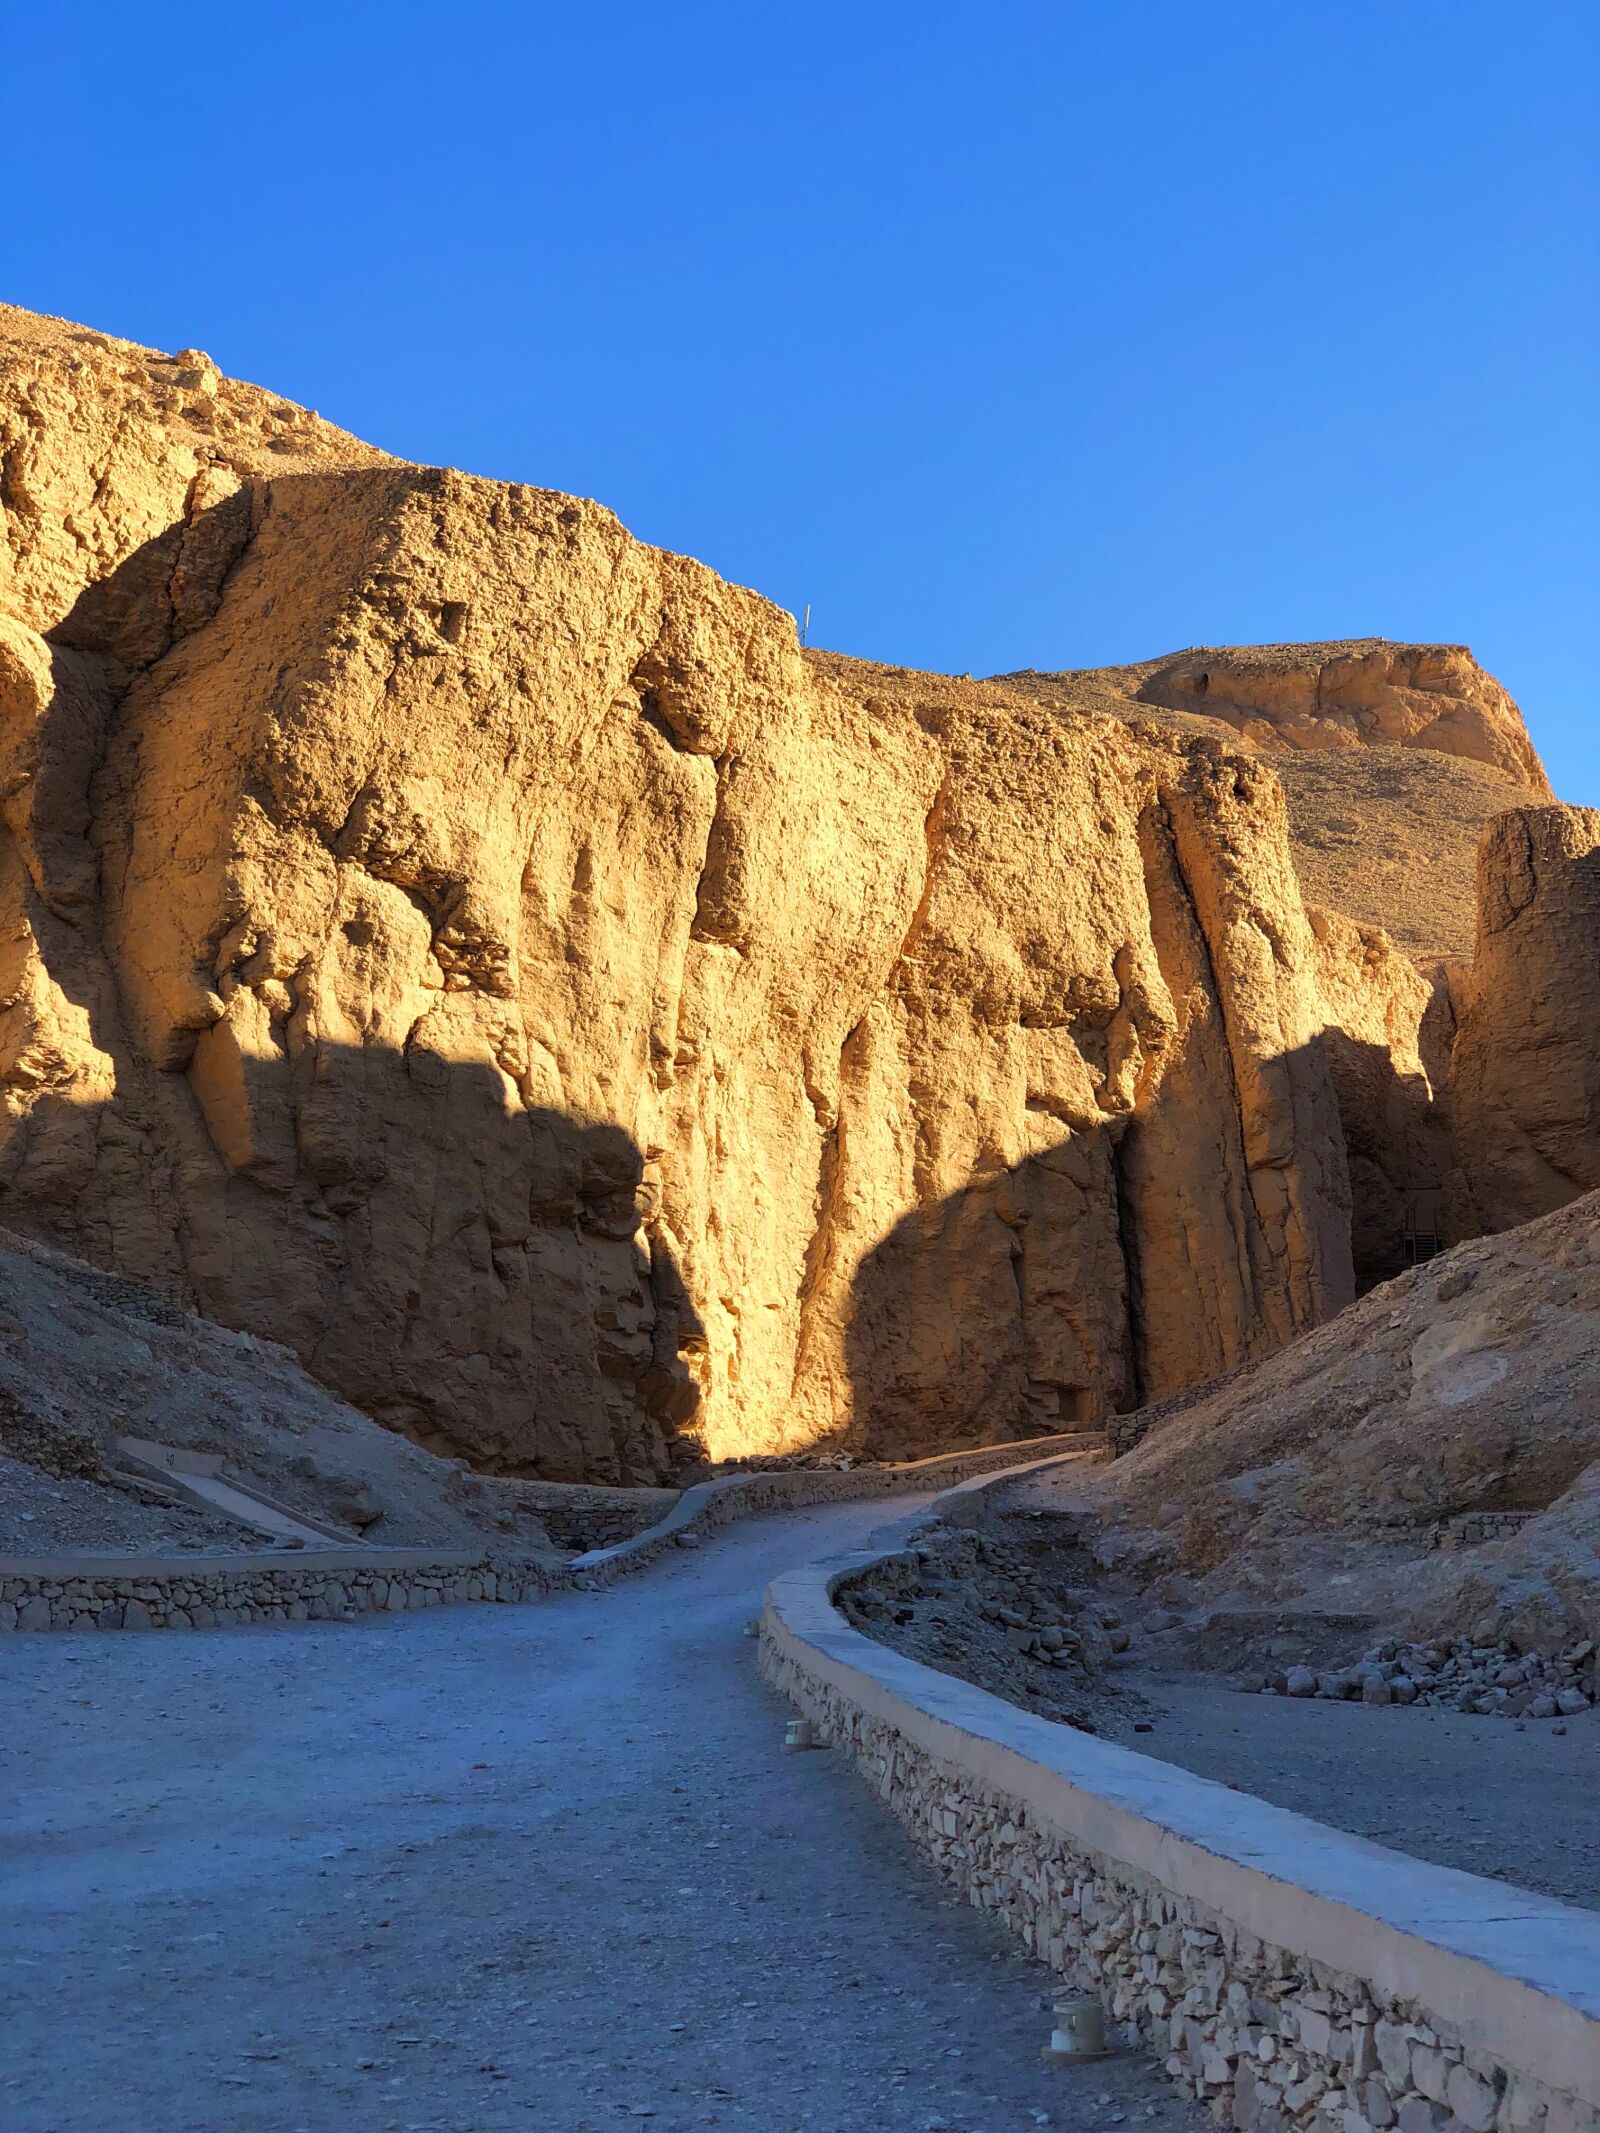 iPhone X back dual camera 6mm f/2.4 sample photo. Valley of kings, luxor photography